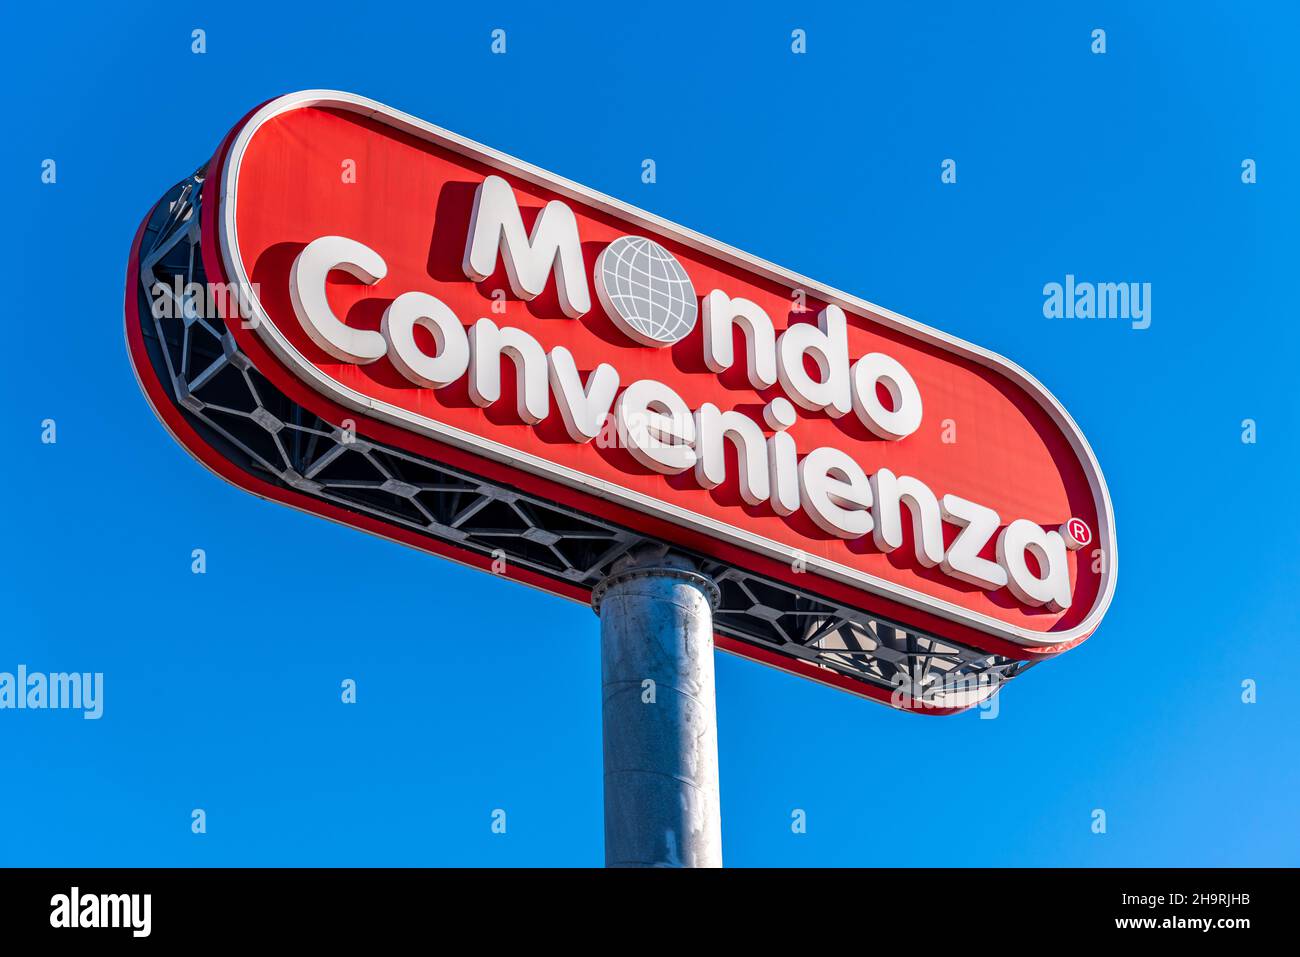 Moncalieri, Turin, Italy - December 6, 2021: large sign with logo of Mondo Convenienza store on blue sky, it is Italian company large distribution of Stock Photo